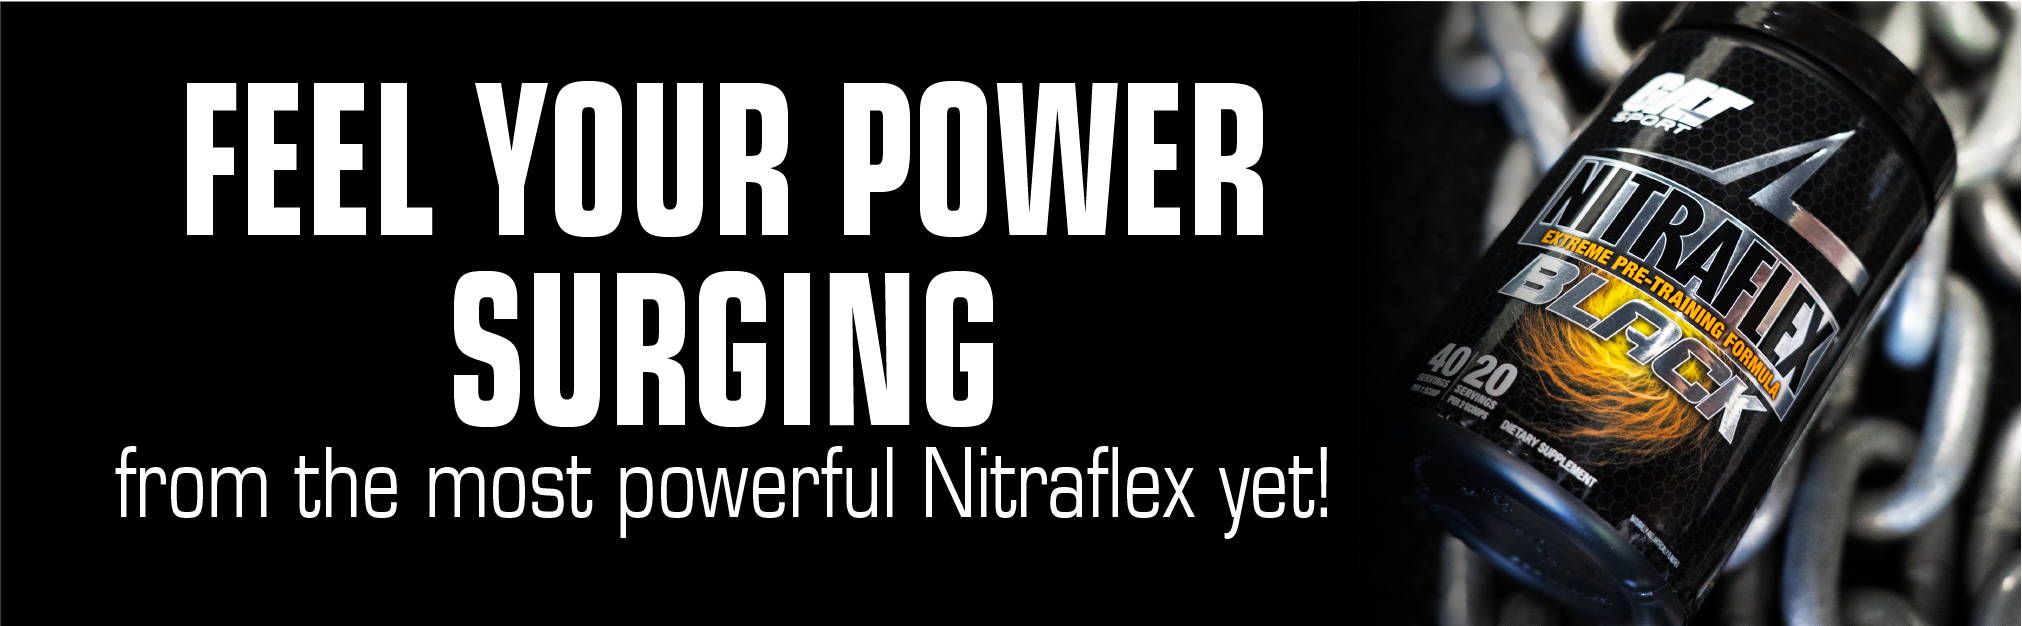 Feel your power surging from the most powerful Nitraflex yet